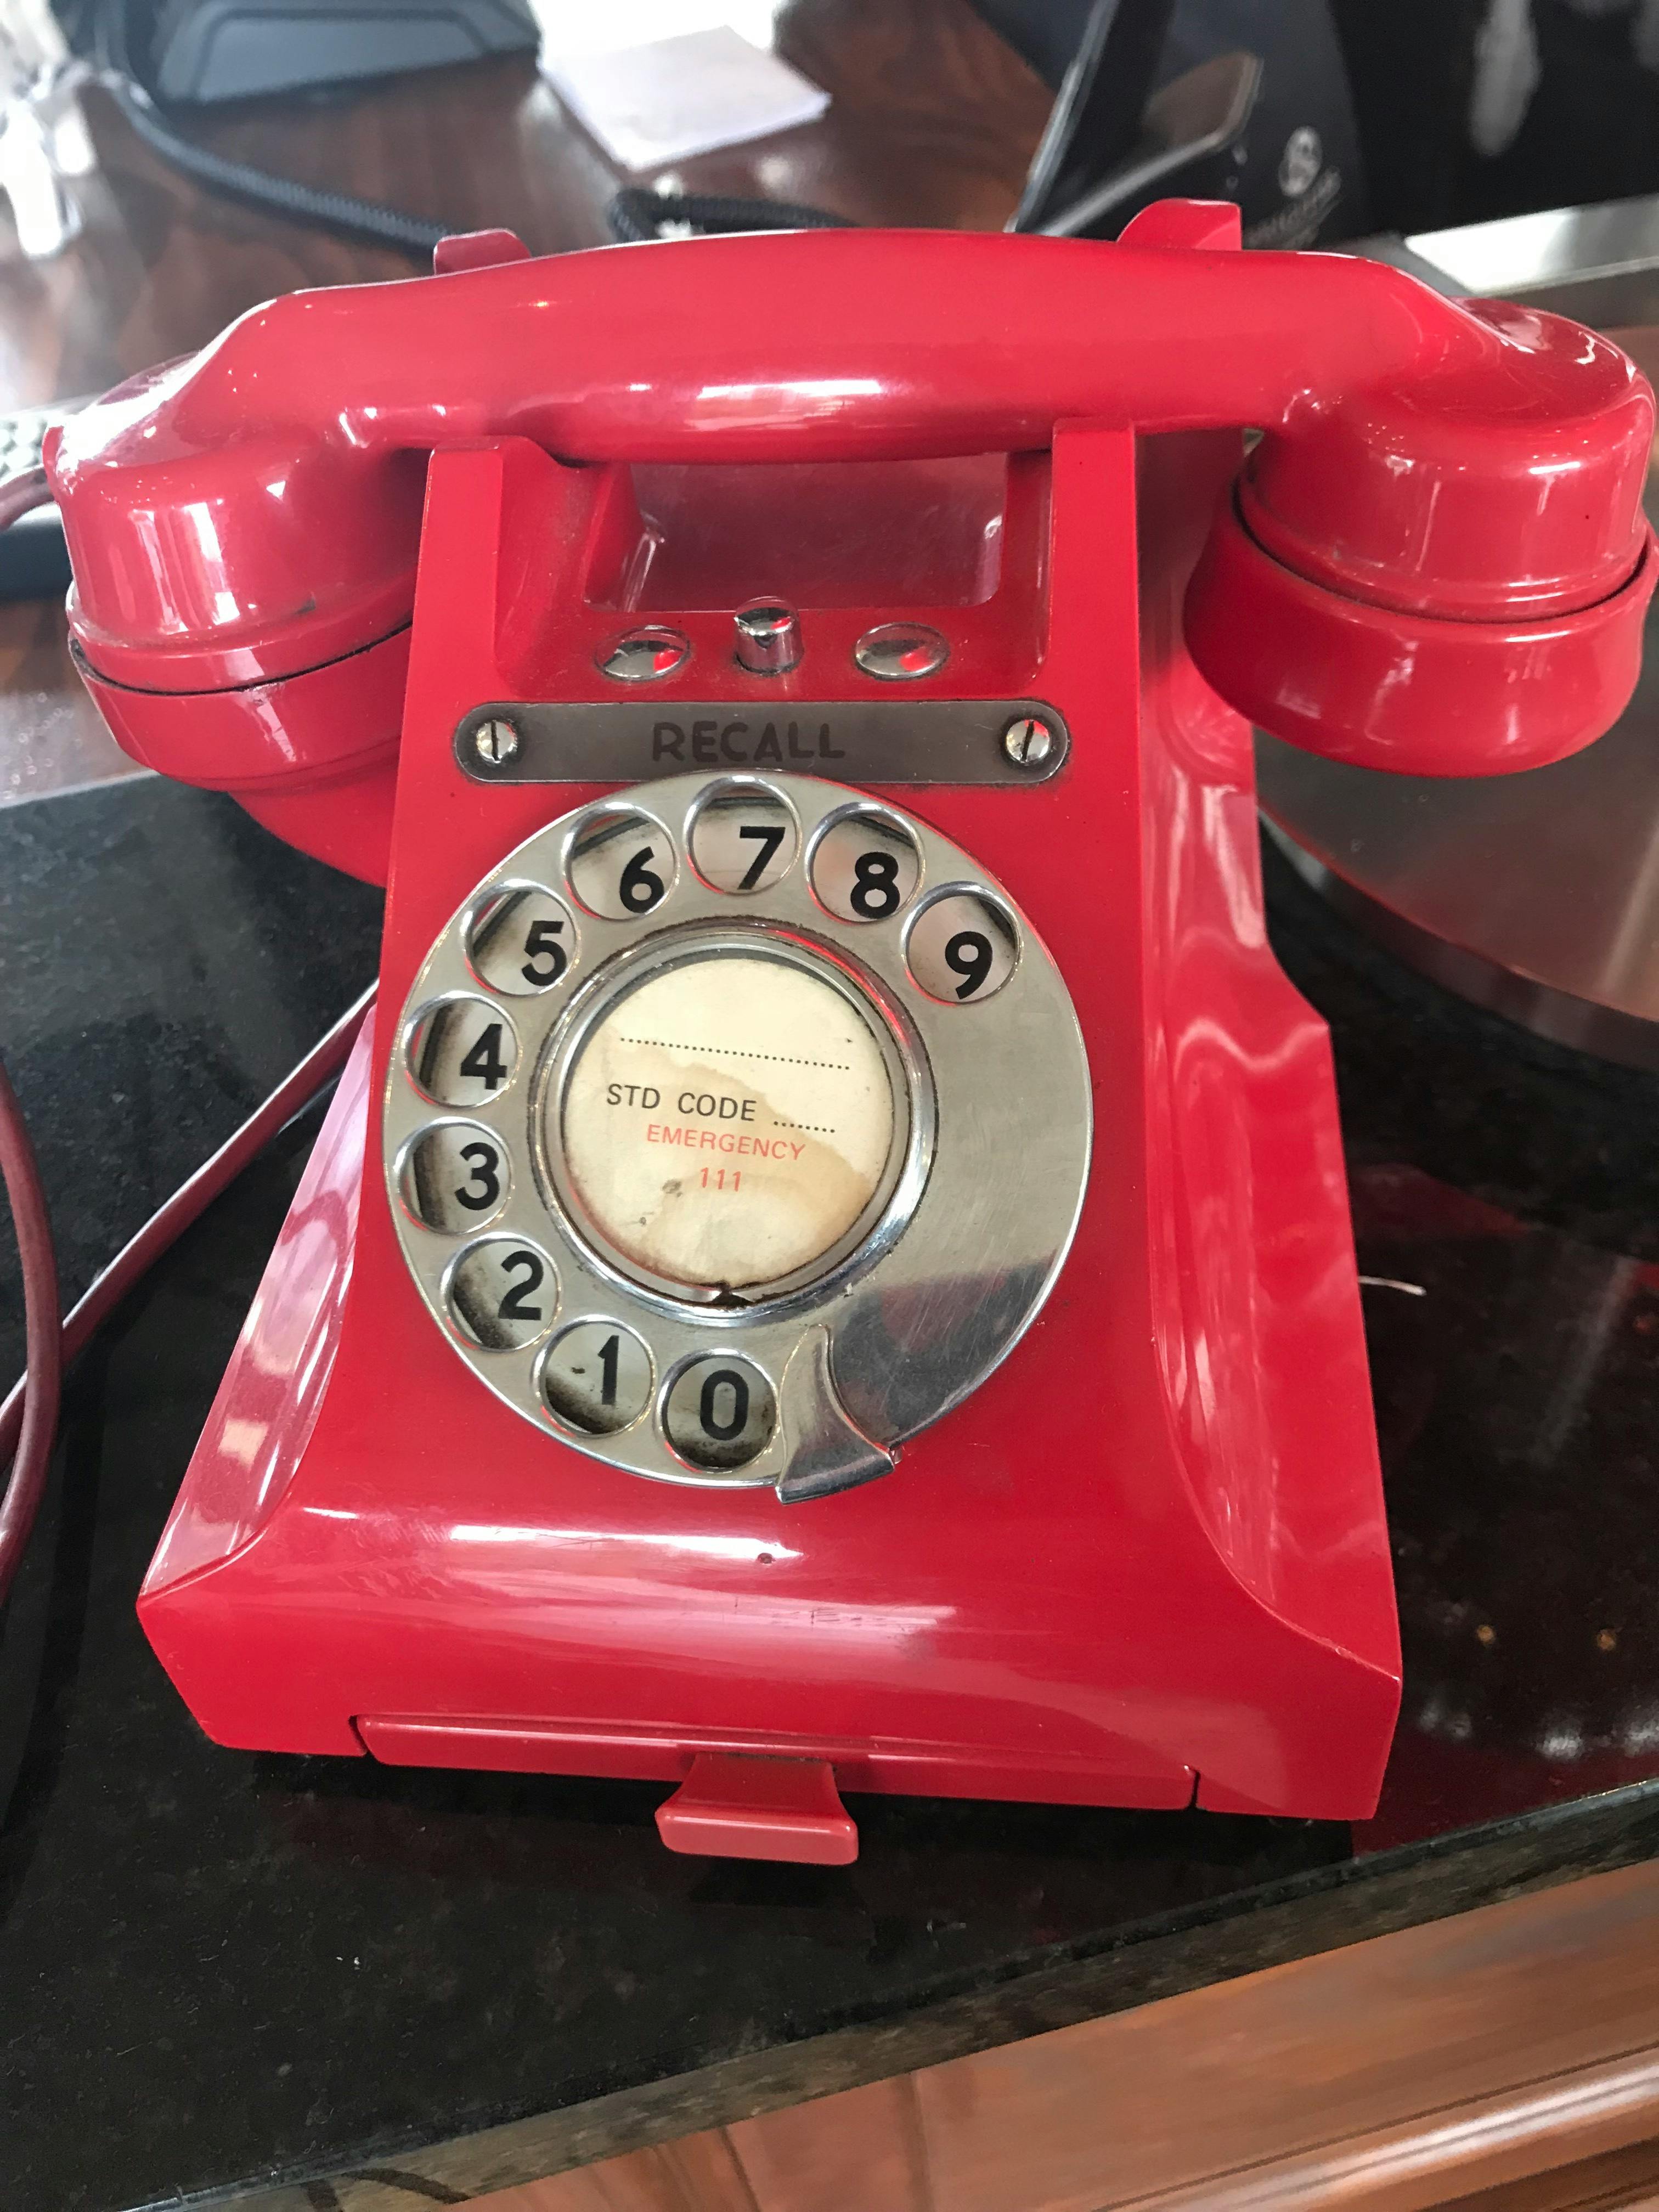 Free stock photo of antique red phone, antique telephone, red phone with drawer